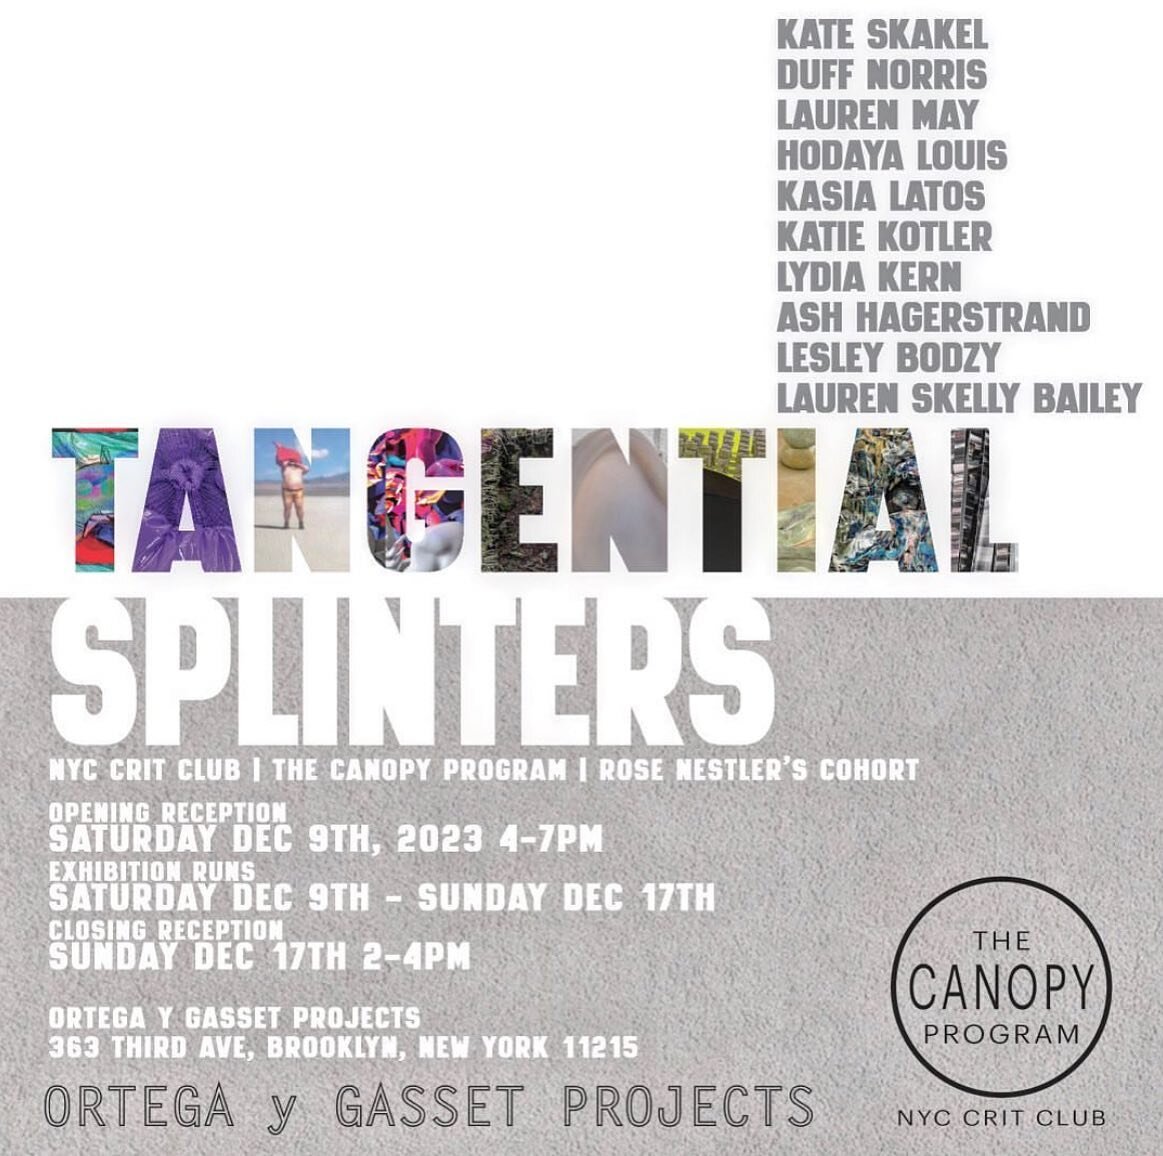 Very excited for this show! It&rsquo;s my first since moving to NYC last December ☺️

Tangential Splinters

December 9-17th

Opening reception: Saturday, December 9th, 4-7 pm
Closing reception: Sunday, December 17th, 2-4 pm

Ortega Y Gassett Projects